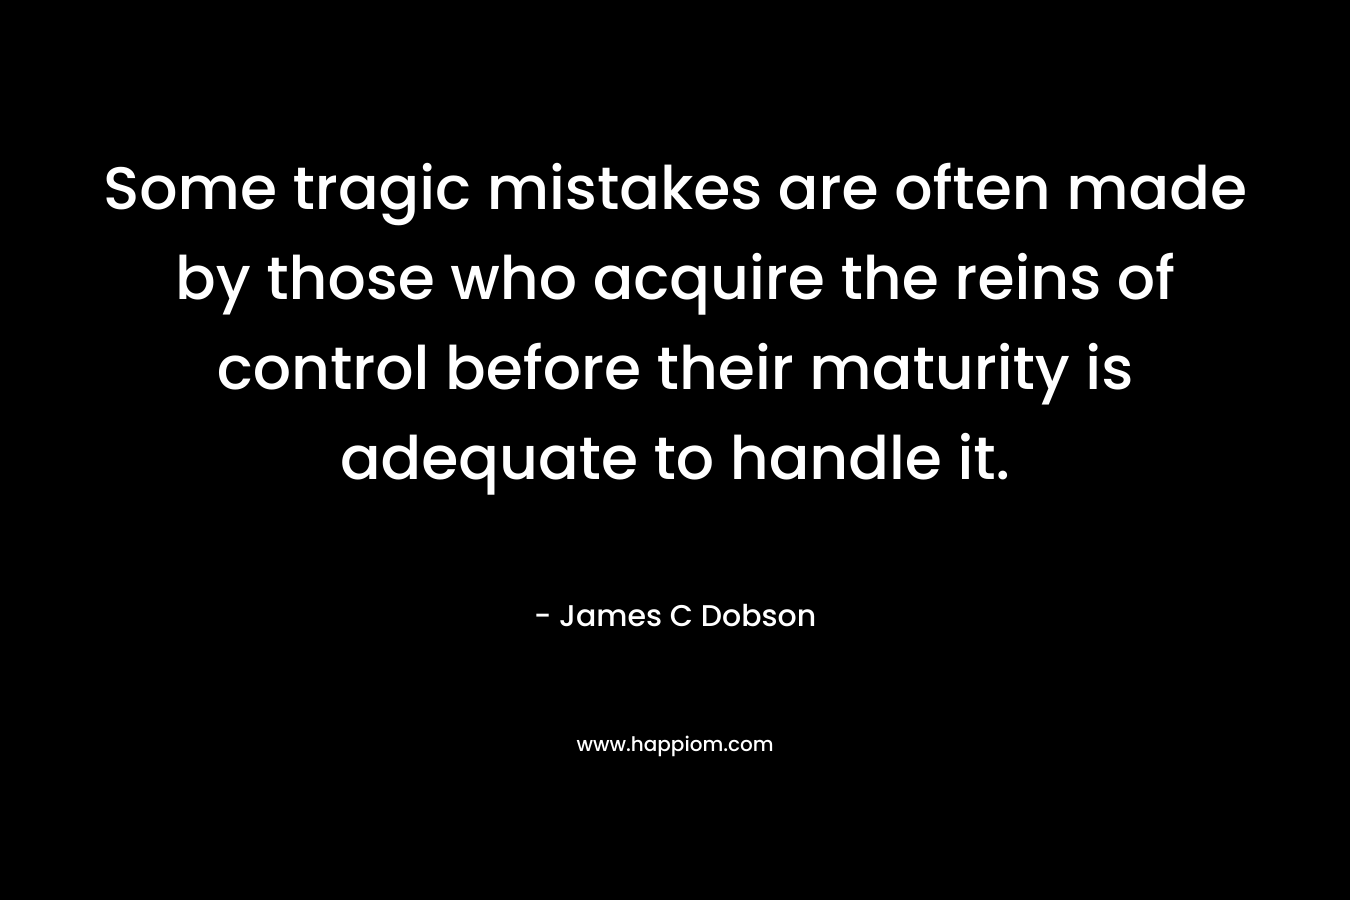 Some tragic mistakes are often made by those who acquire the reins of control before their maturity is adequate to handle it. – James C Dobson